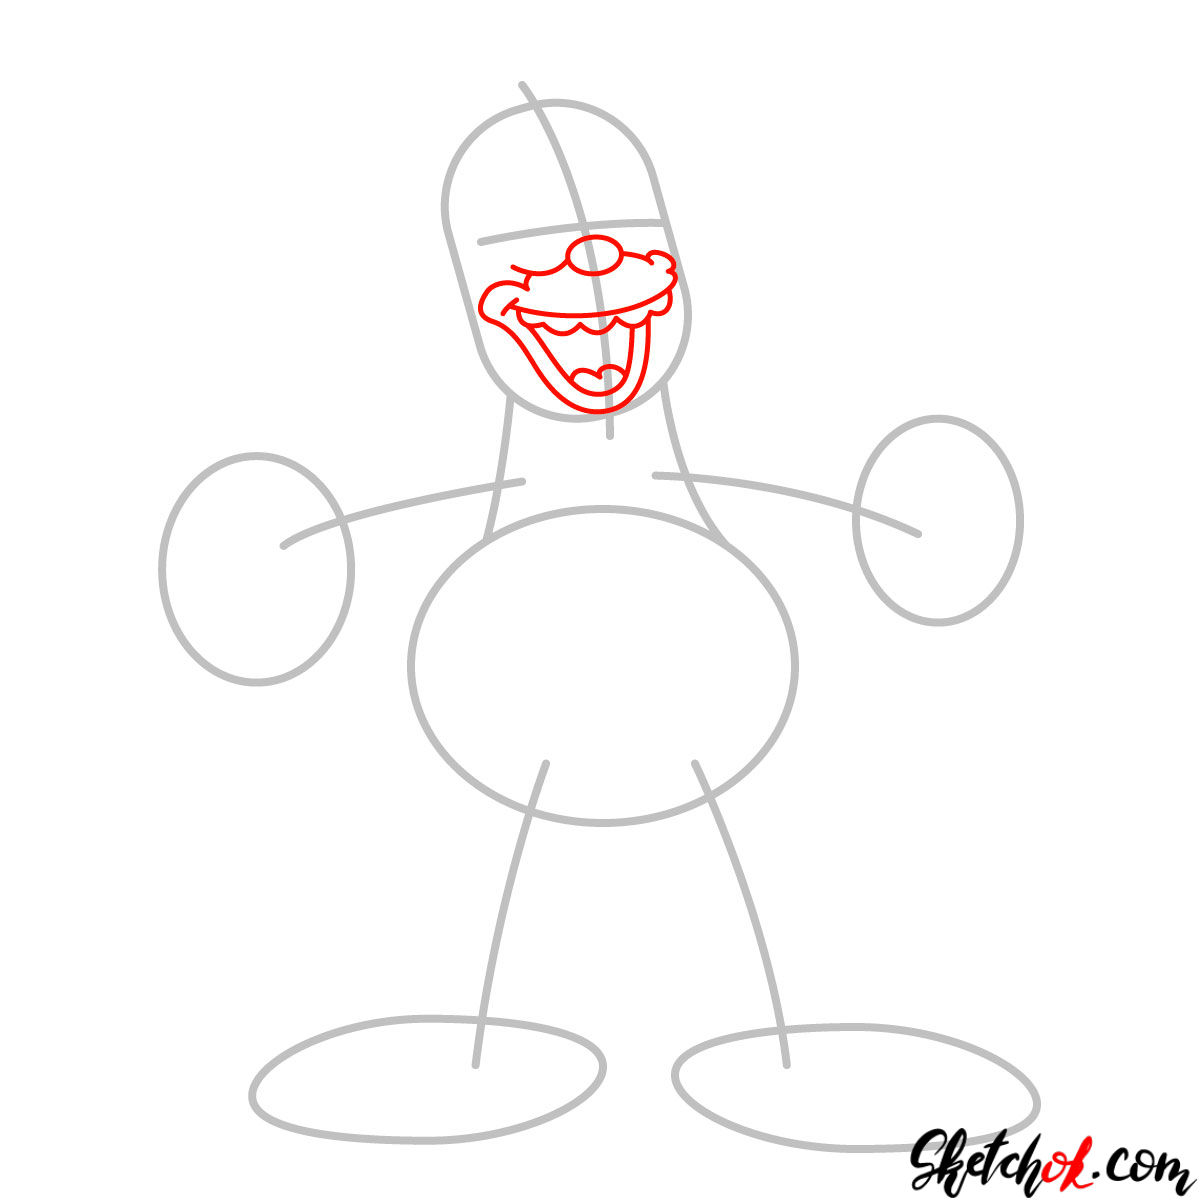 How to draw Krusty the Clown - step 02